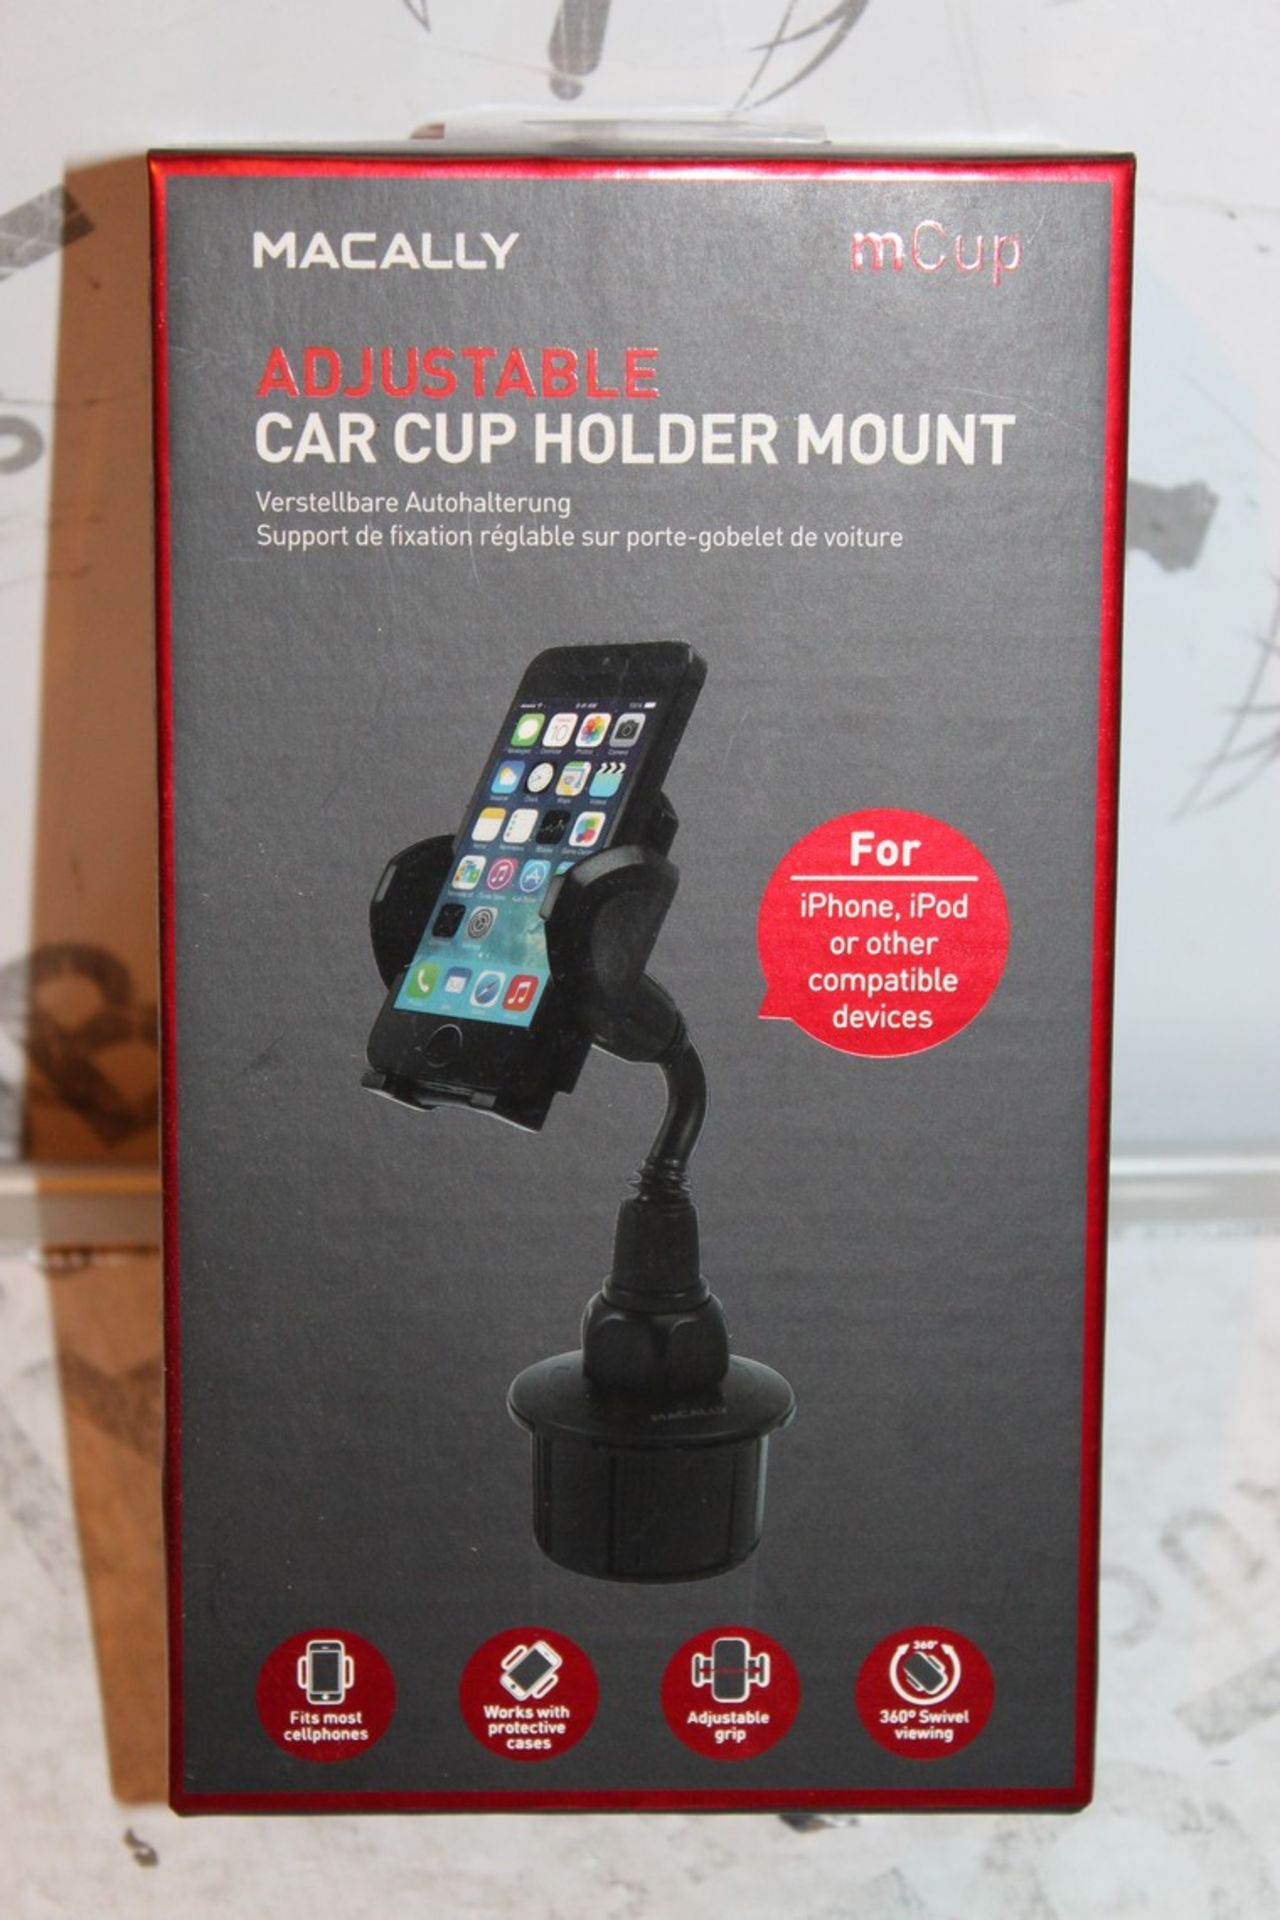 3 Boxed Macally Adjustable Car cup Holder Mounts, Combined RRP£90.00